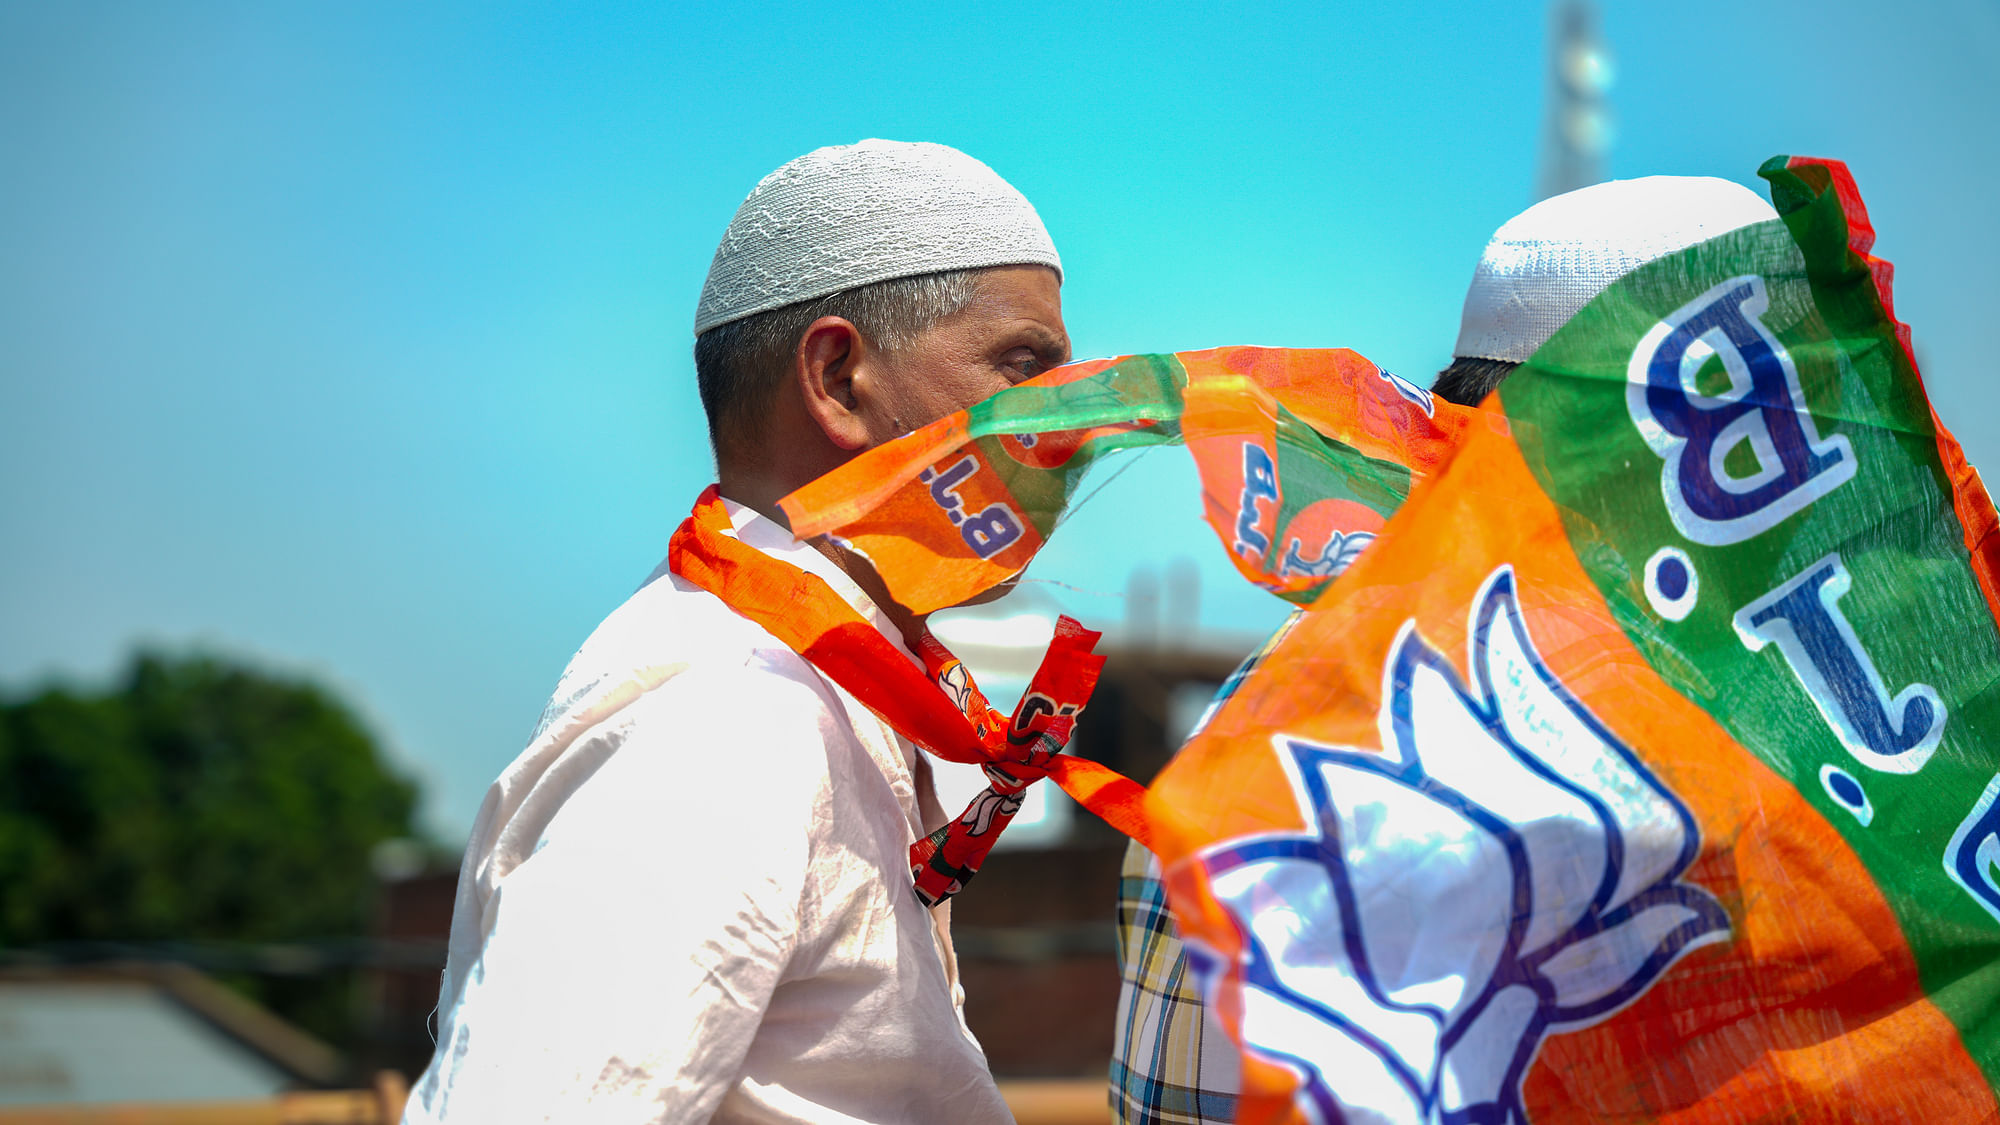 <div class="paragraphs"><p>Muslim men attend a BJP bike rally in Uttar Pradesh's Amroha on 24 April, ahead of Chief Minister Yogi Adityanath's visit to the district to boost Muslim 'Pasmanda' outreach.</p></div>